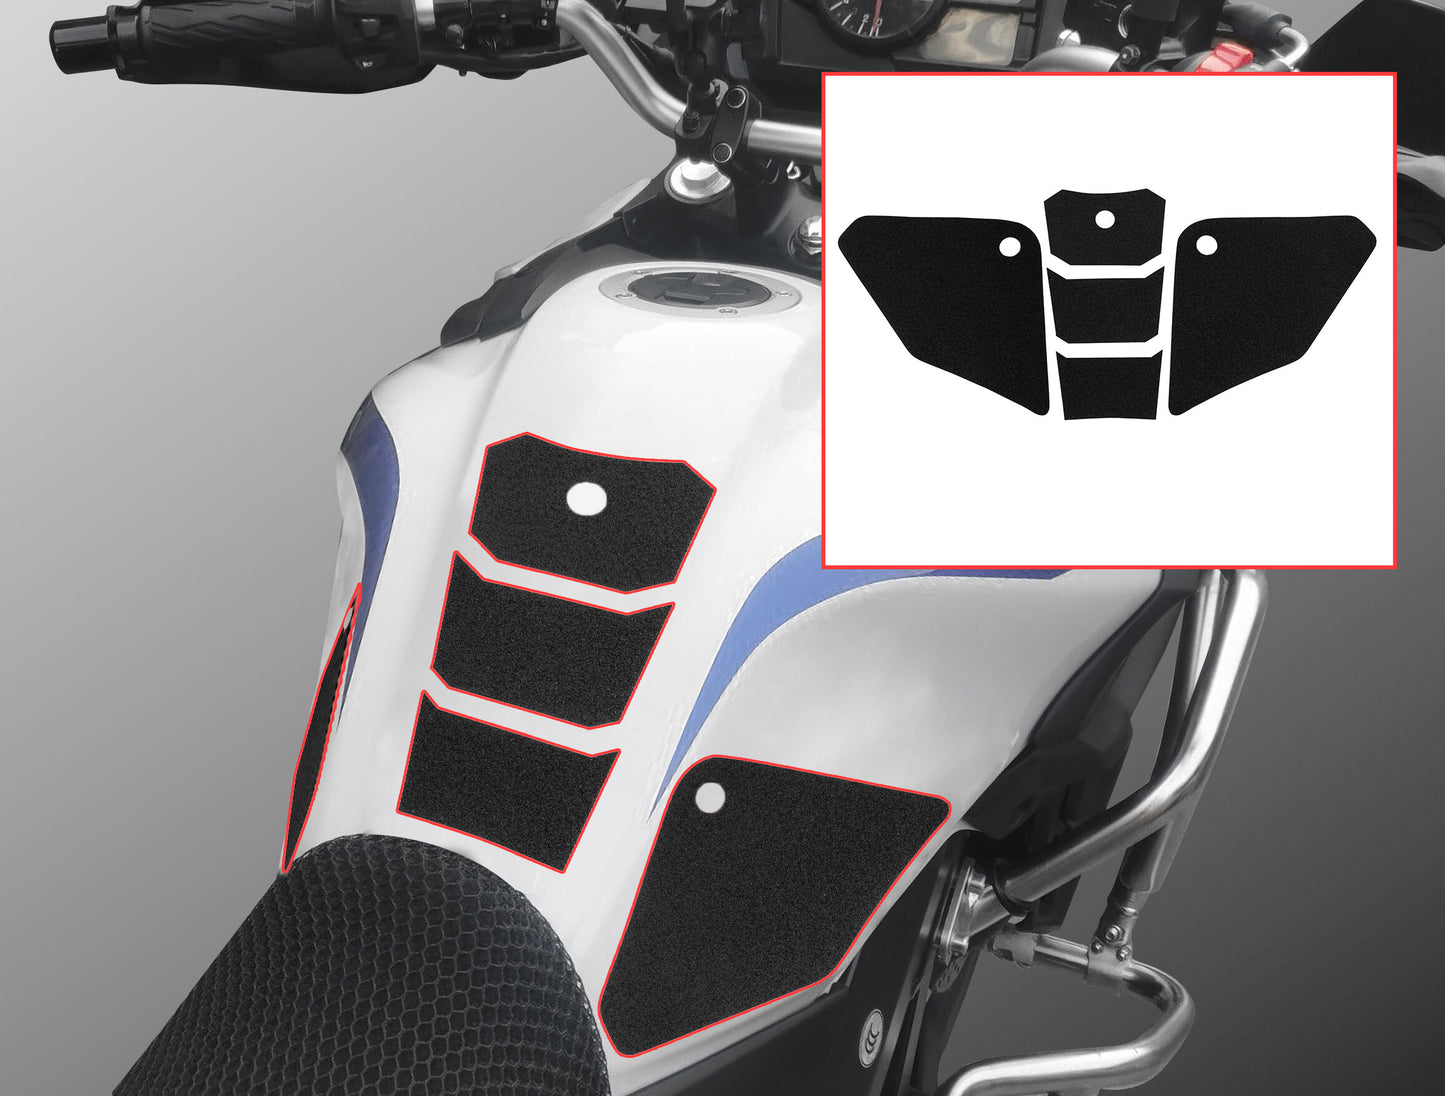 Wolfline Motorcycle Anti Slip Tank Pad Stickers Side Gas Tank Pad Knee Grip Decals Protection For Suzuki V-Strom650 DL650 DL 650